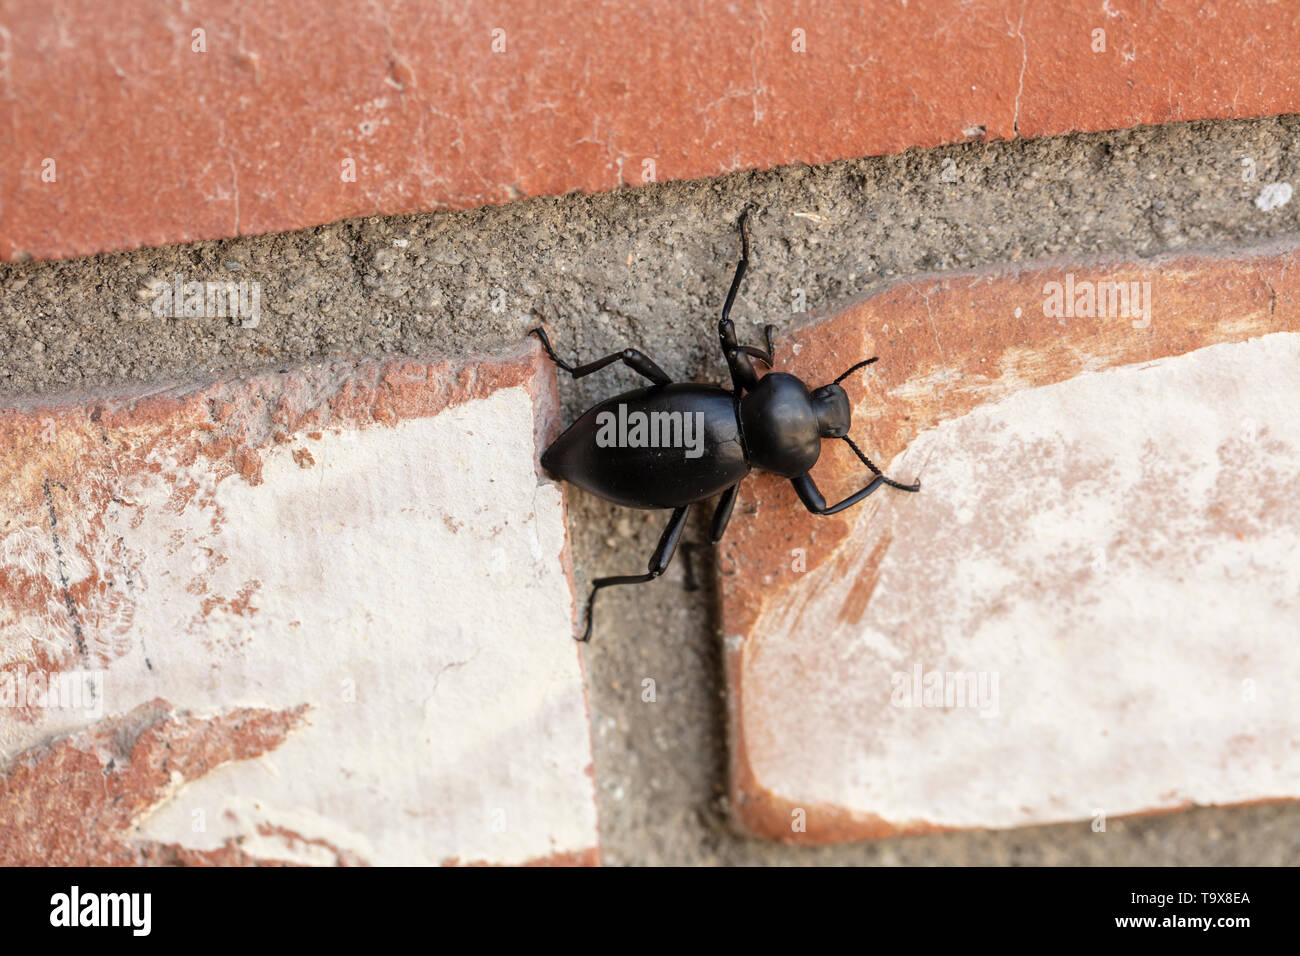 Black Pnacate Beetle, also known as a stinkbug, crawling on a brick wall outdoors Stock Photo